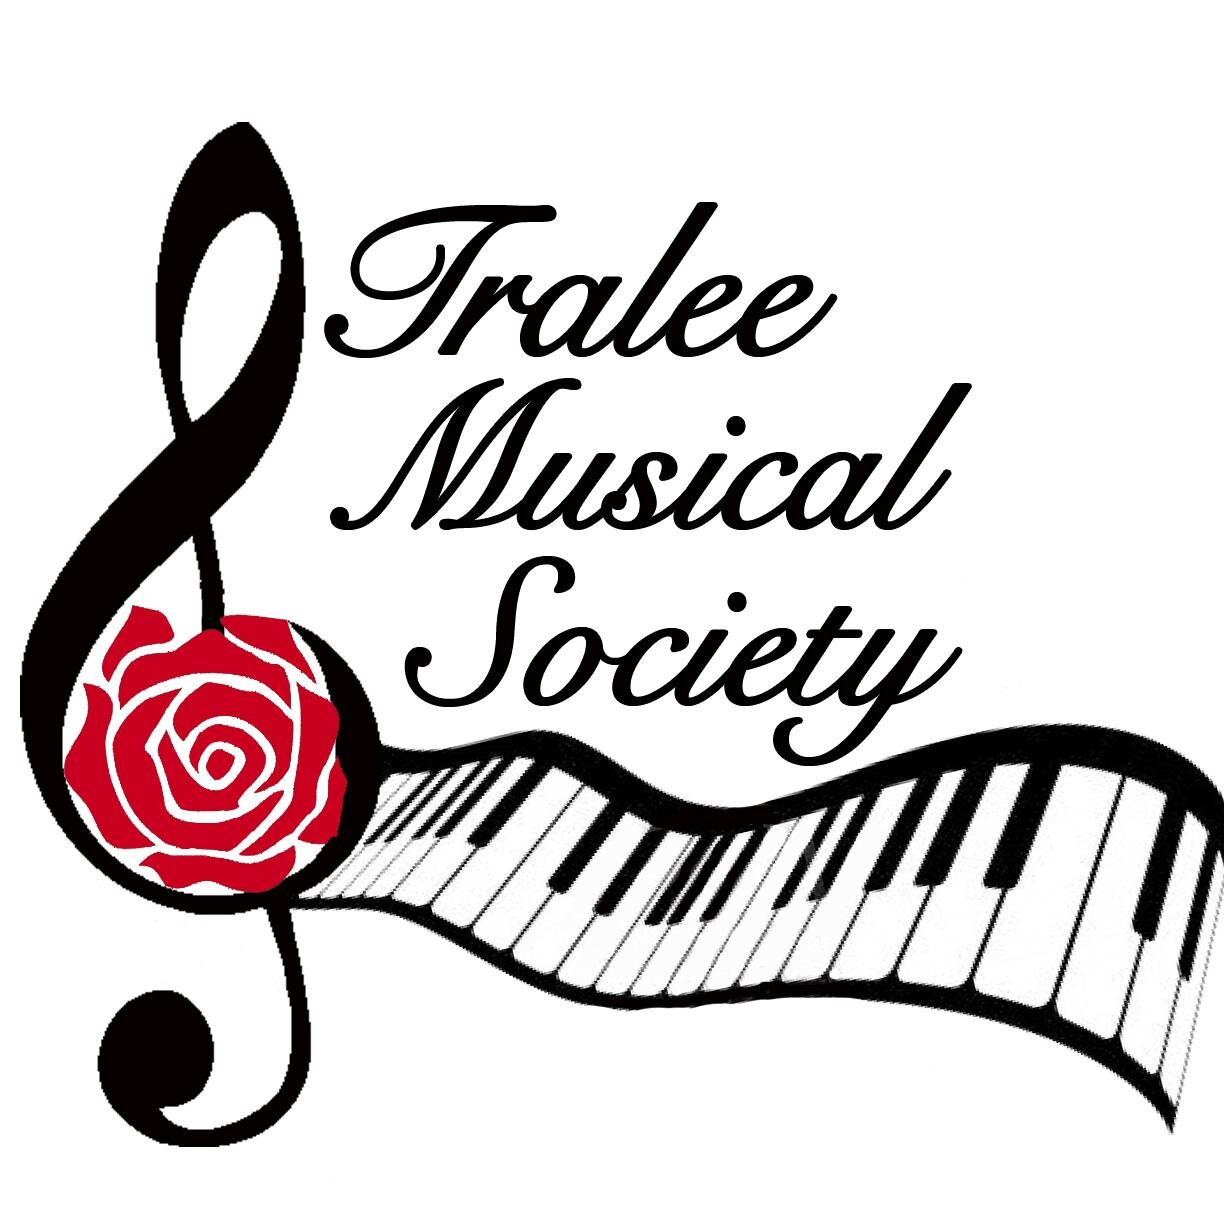 The Award-Winning Tralee Musical Society, Established 1986. Celebrating 30 years in Show Business! #TMS30thAnniversary ❤️ 
A proud member of @Aims_ie